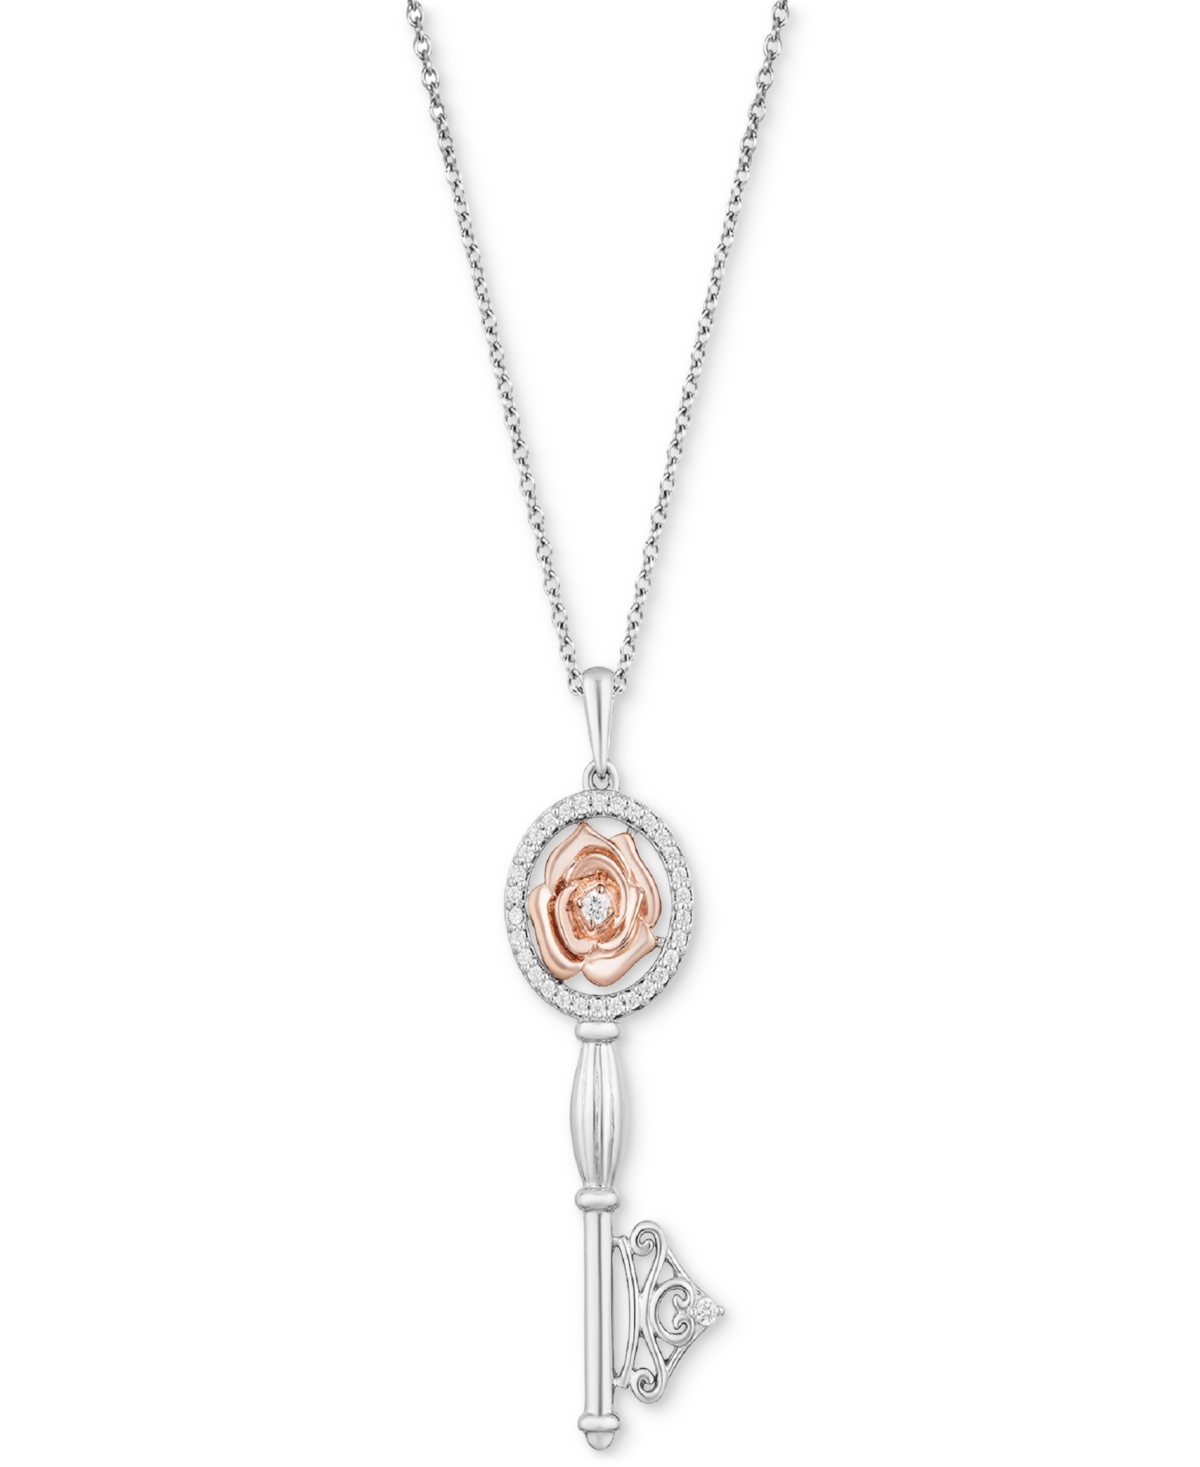 Diamond Belle Rose Key Pendant Necklace (1/6 ct. t.w.) in Sterling Silver & 14k Rose Gold-Plate - Two-Tone